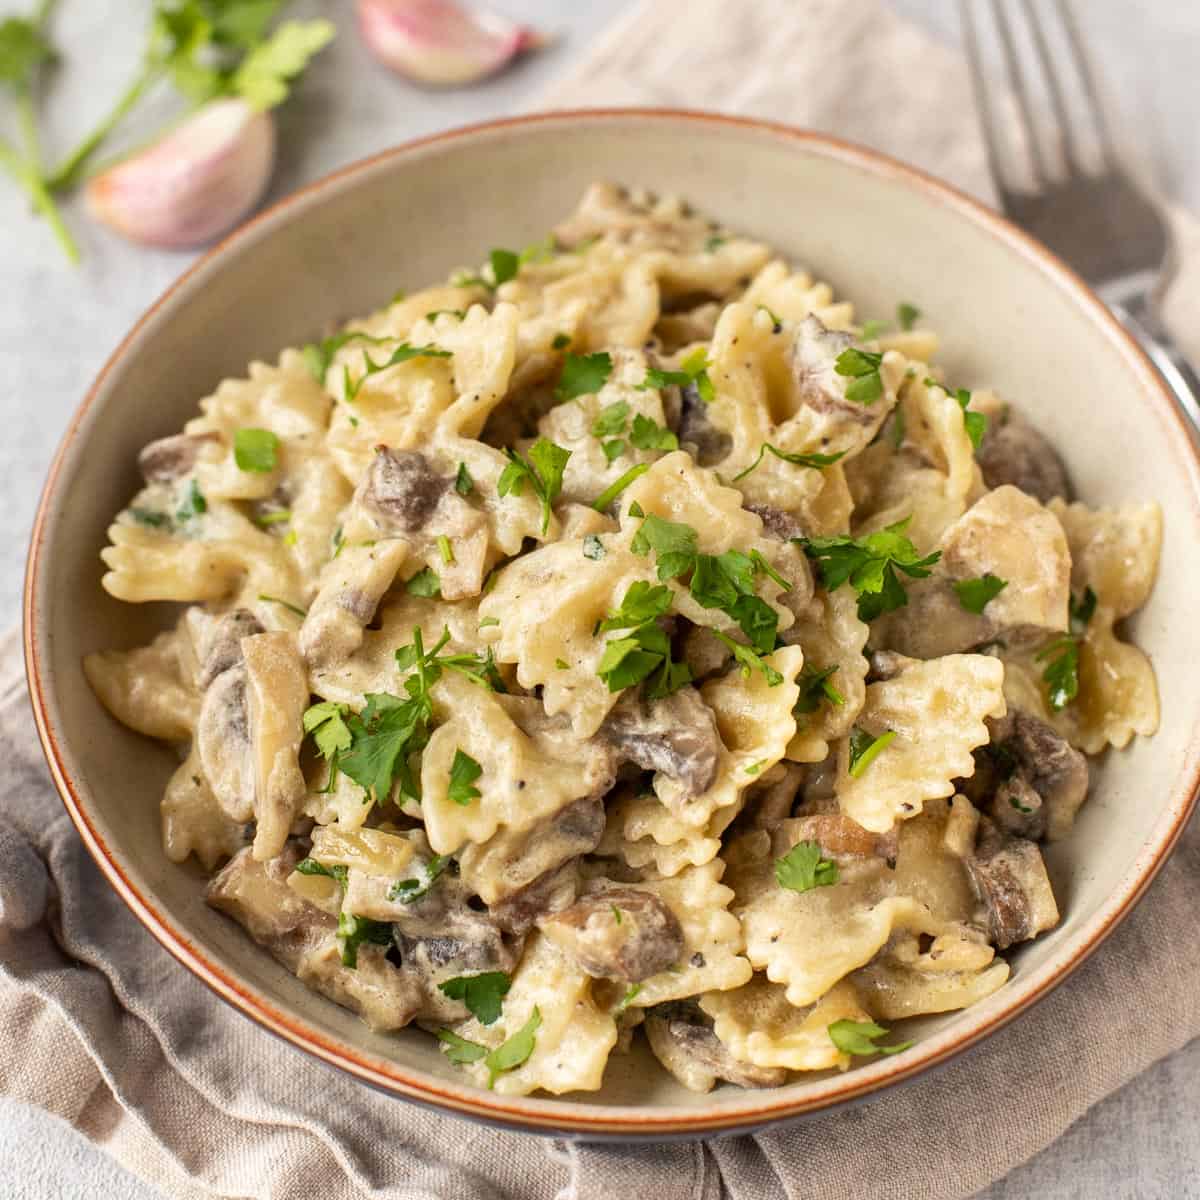 Pasta in a creamy white wine sauce topped with fresh parsley.